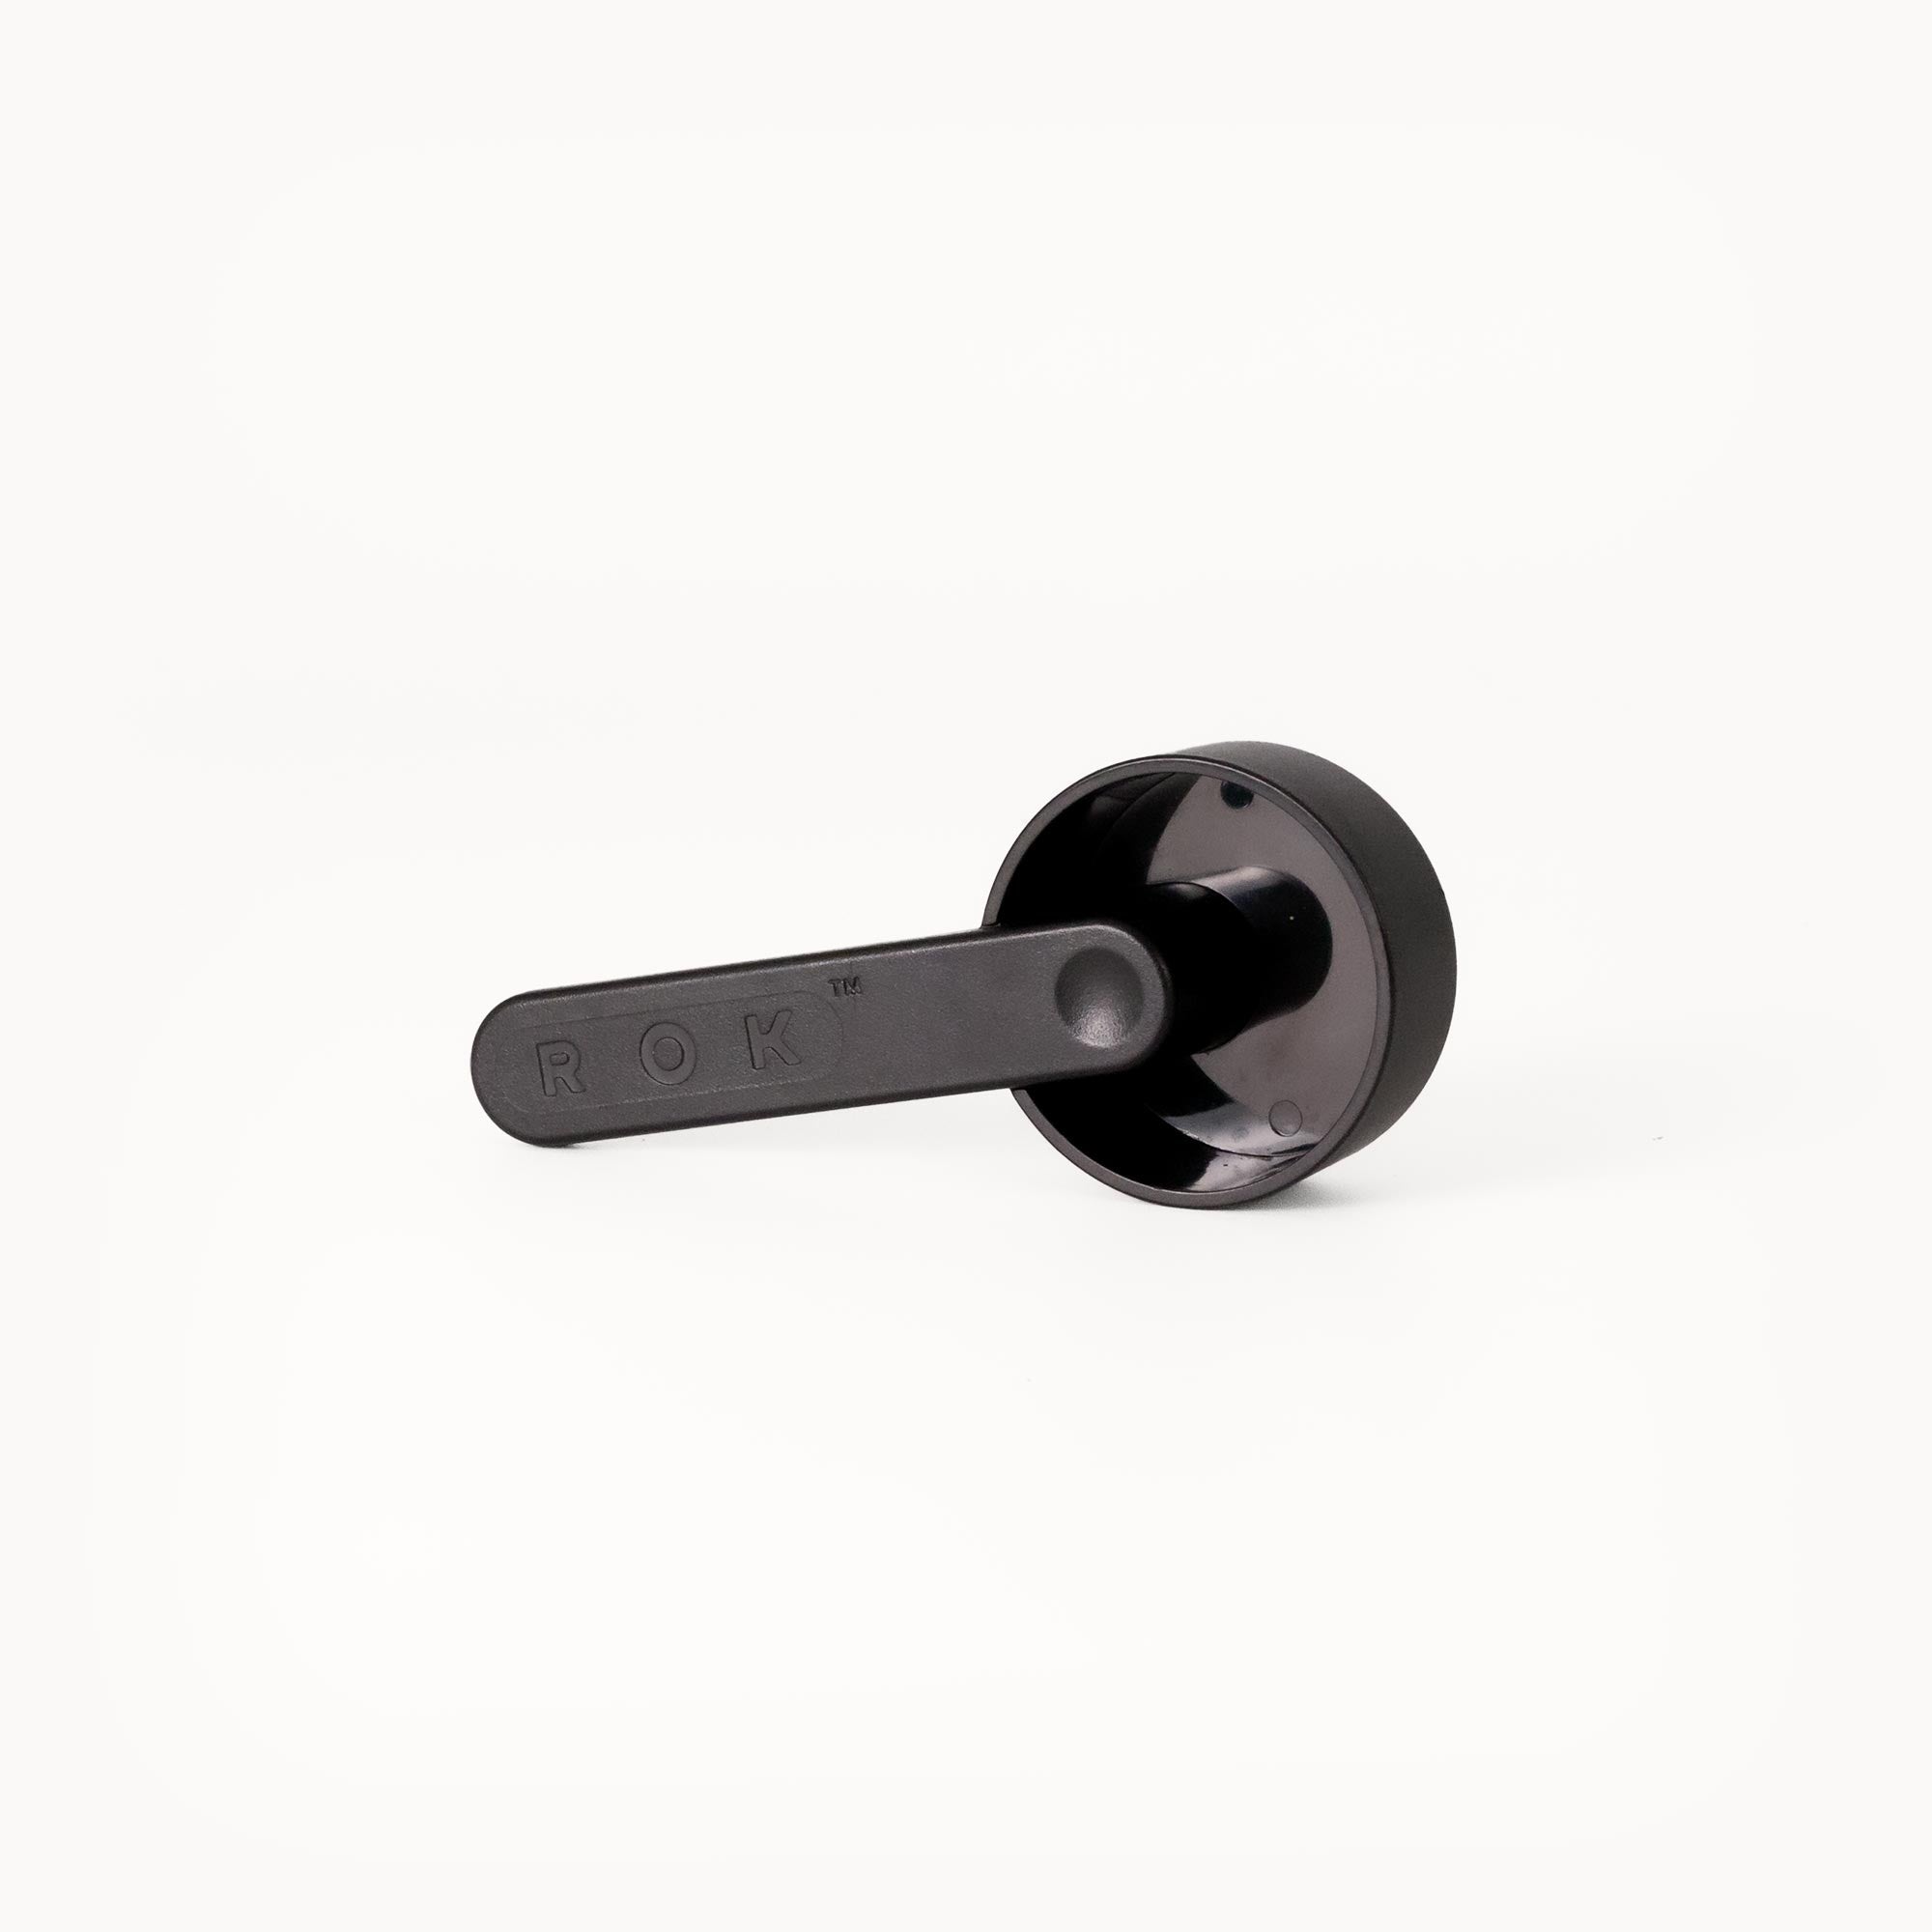 Spoon/Tamp